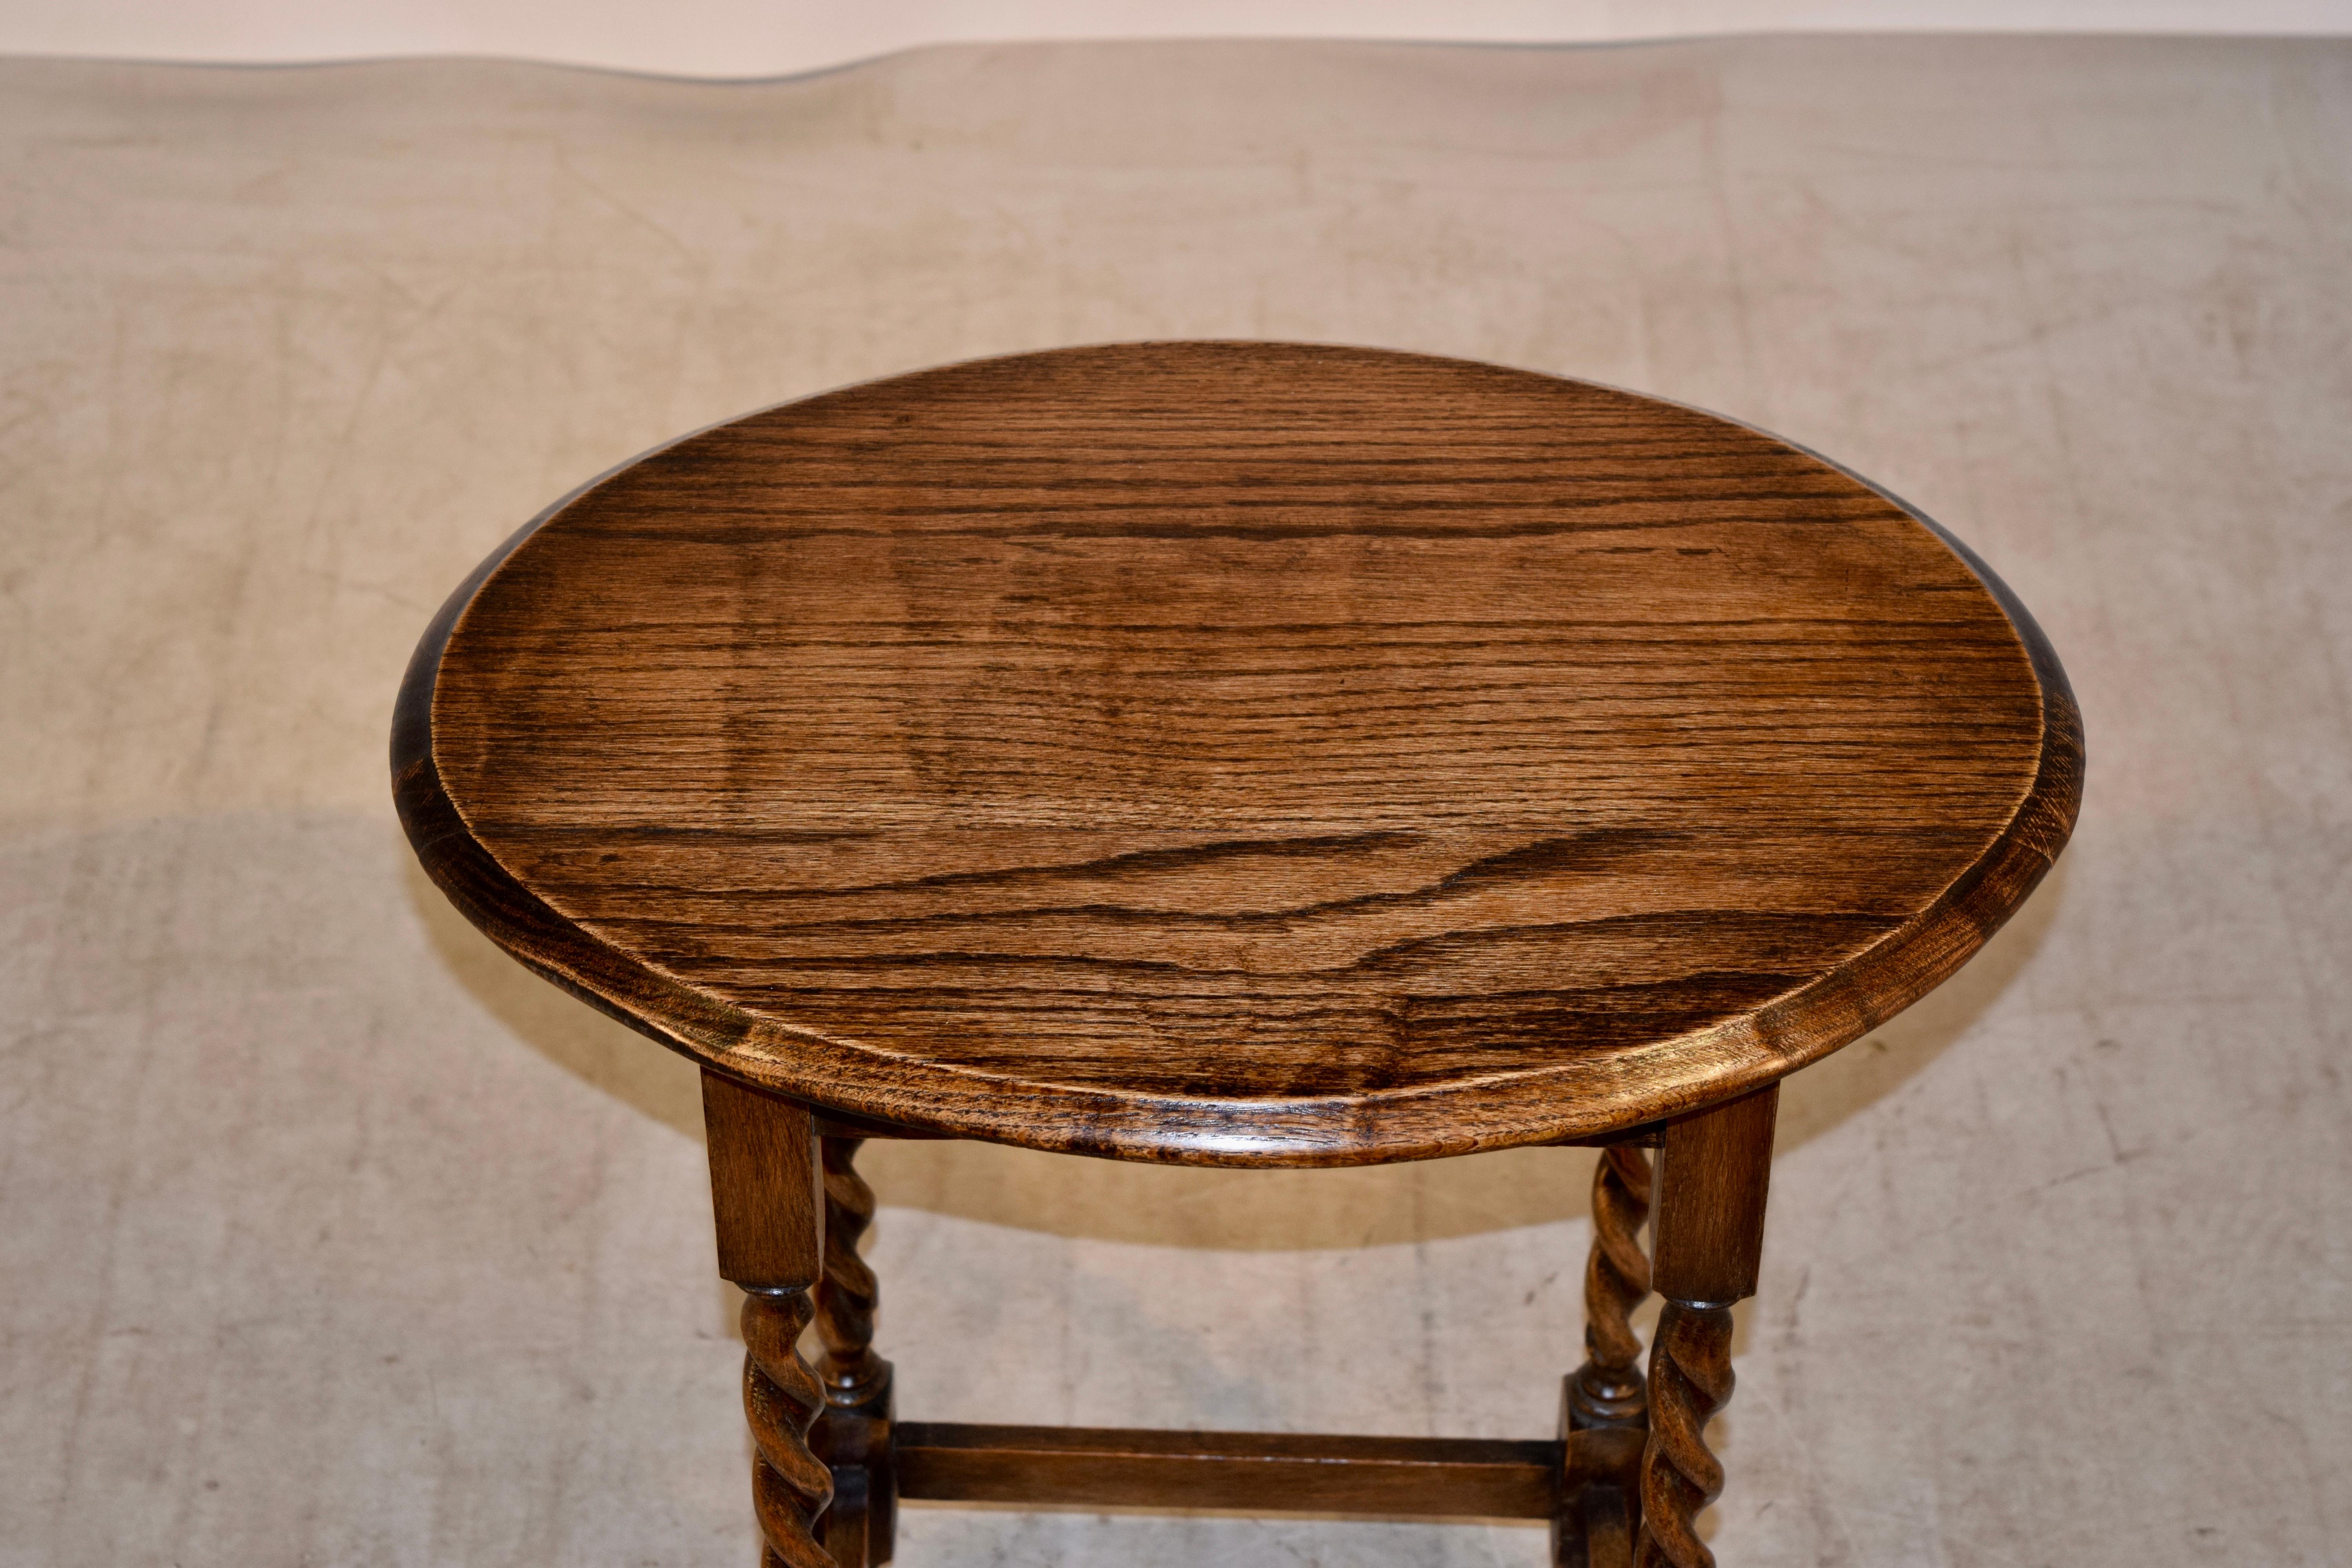 Early 20th Century English Oval Side Table, circa 1900